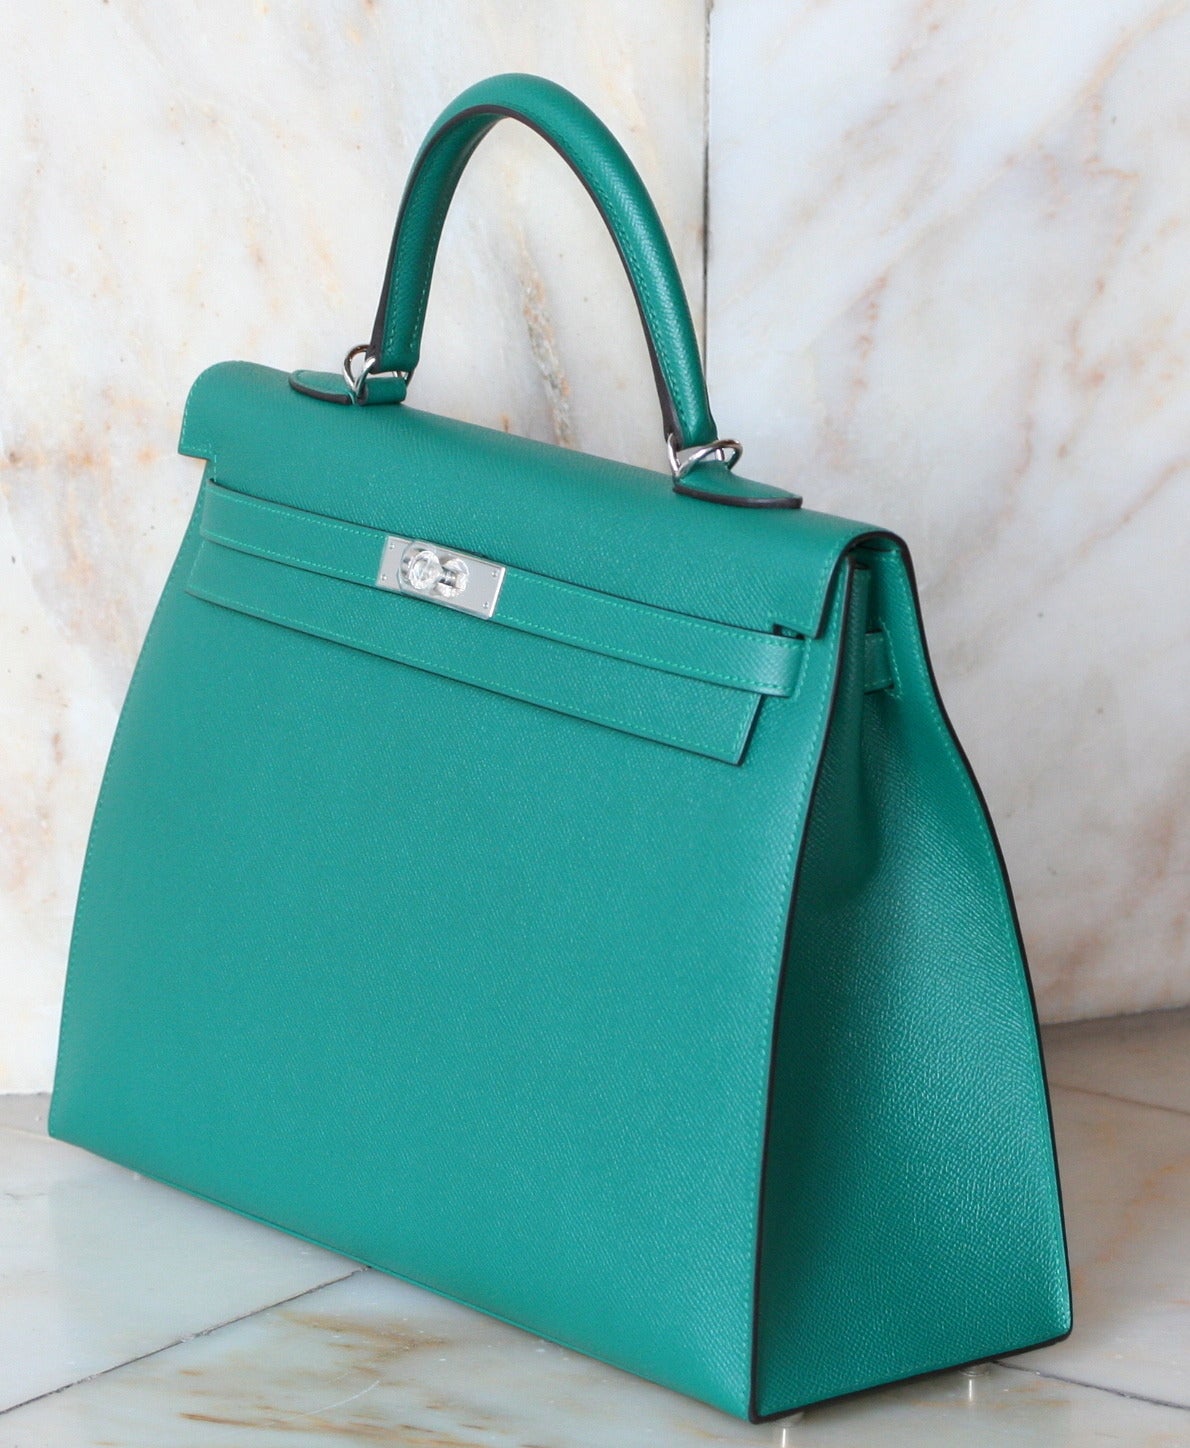 HERMES Kelly Malachite Epsom 35', comes  with complete packaging and accessories, original invoice.   Pristine, unworn condition.